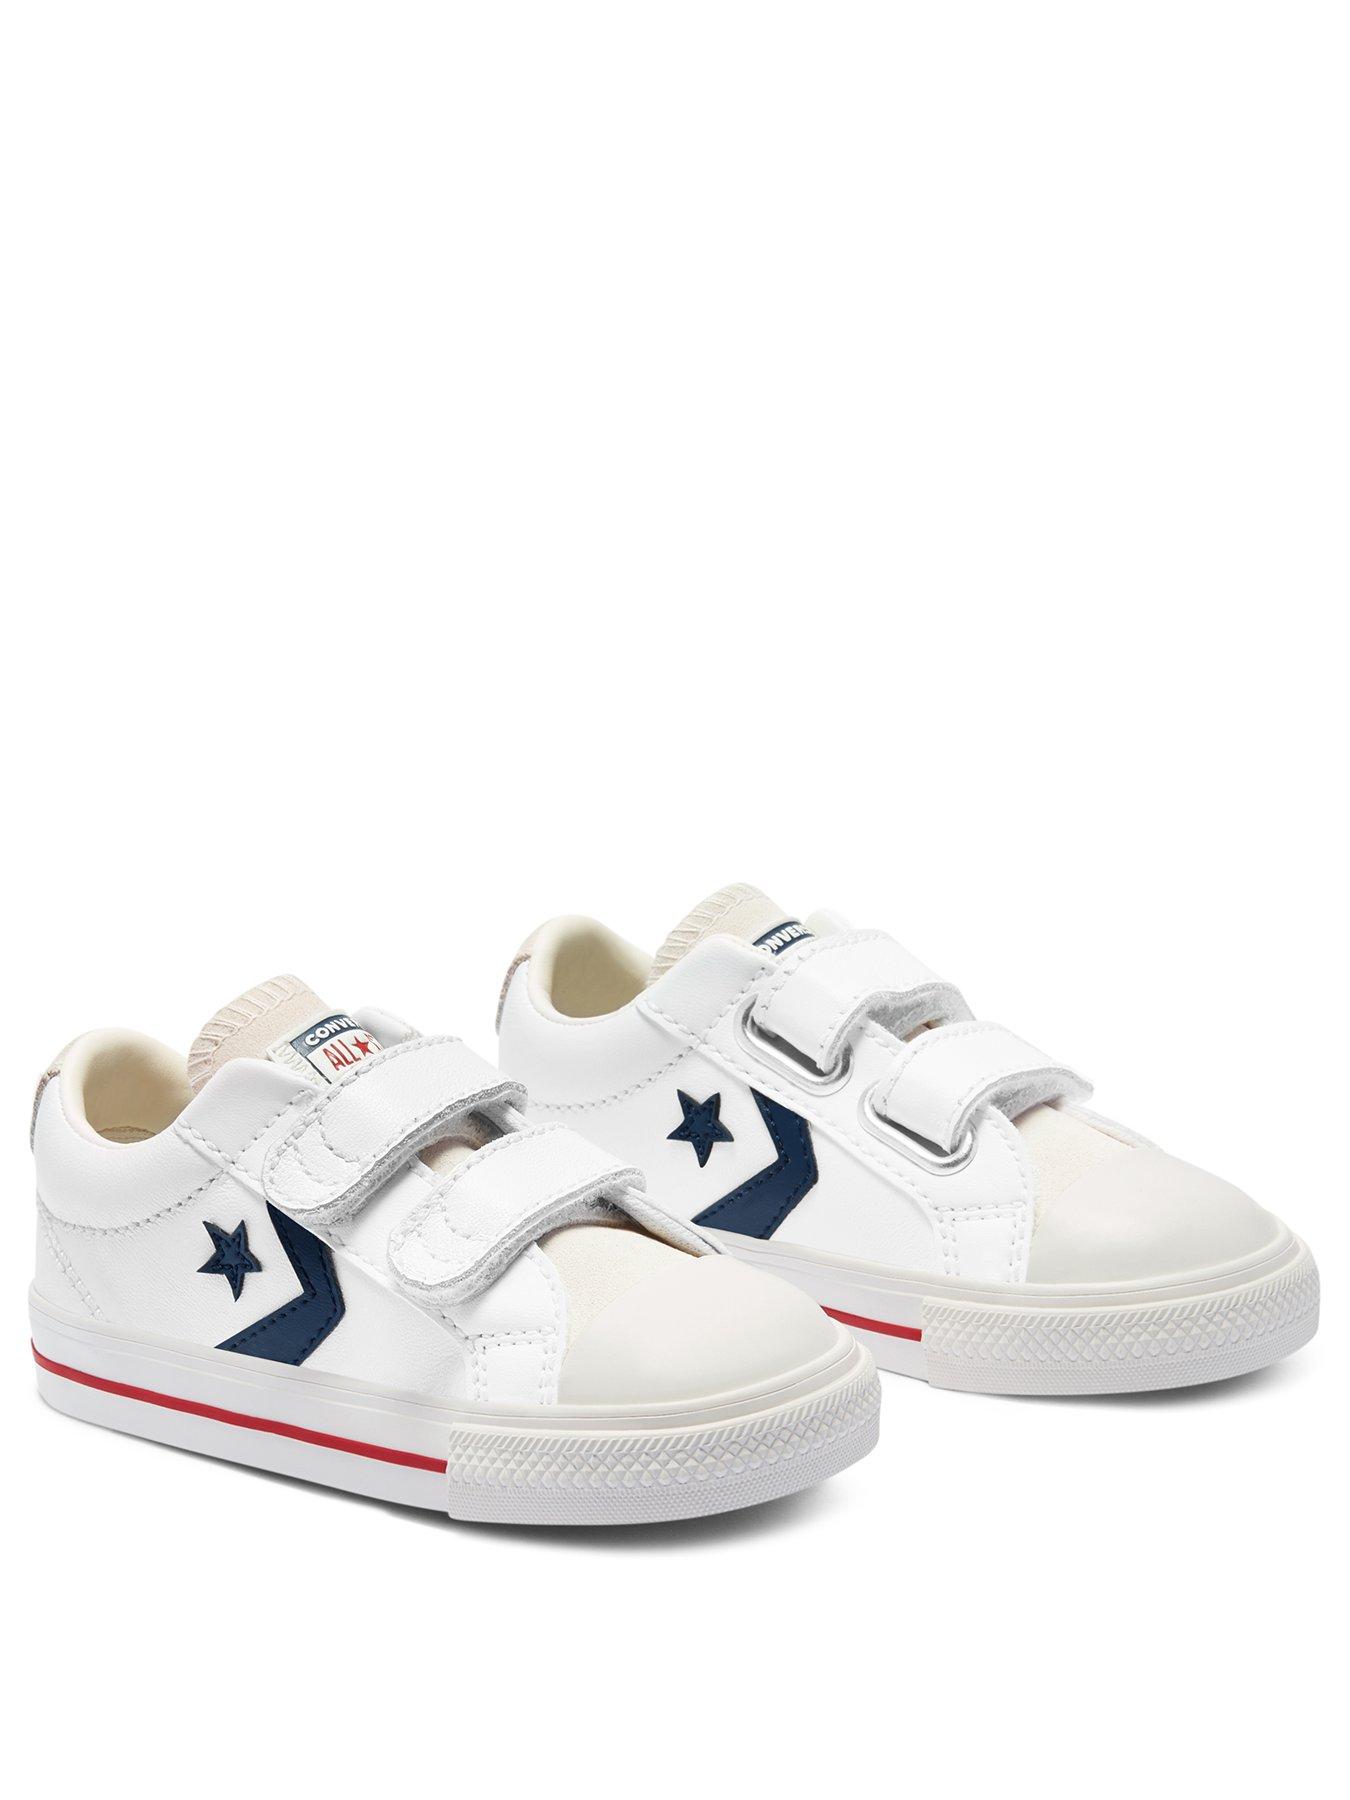 converse star player ox infant